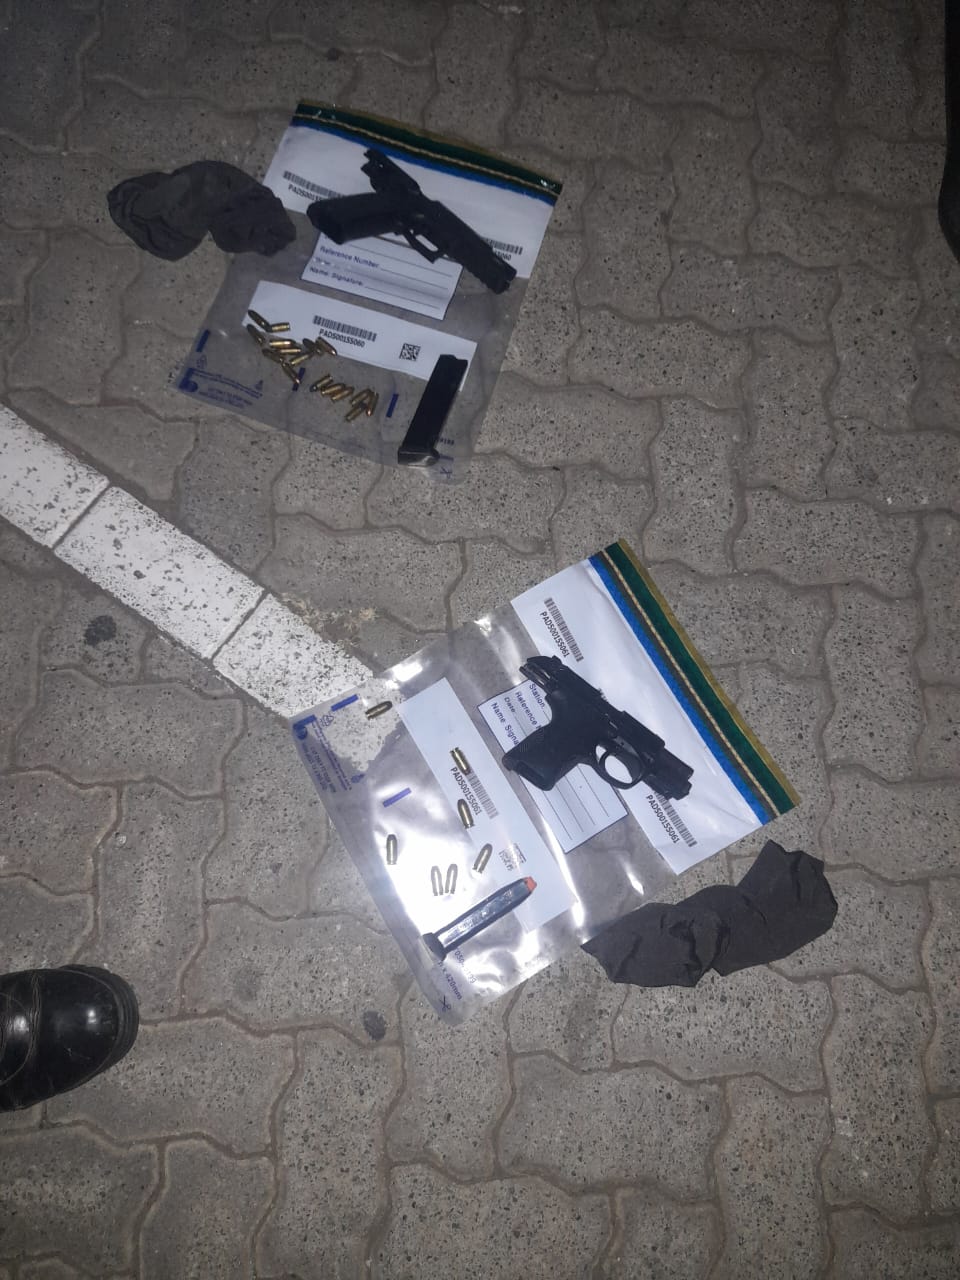 Three arrested for planned armed robbery in Theunissen